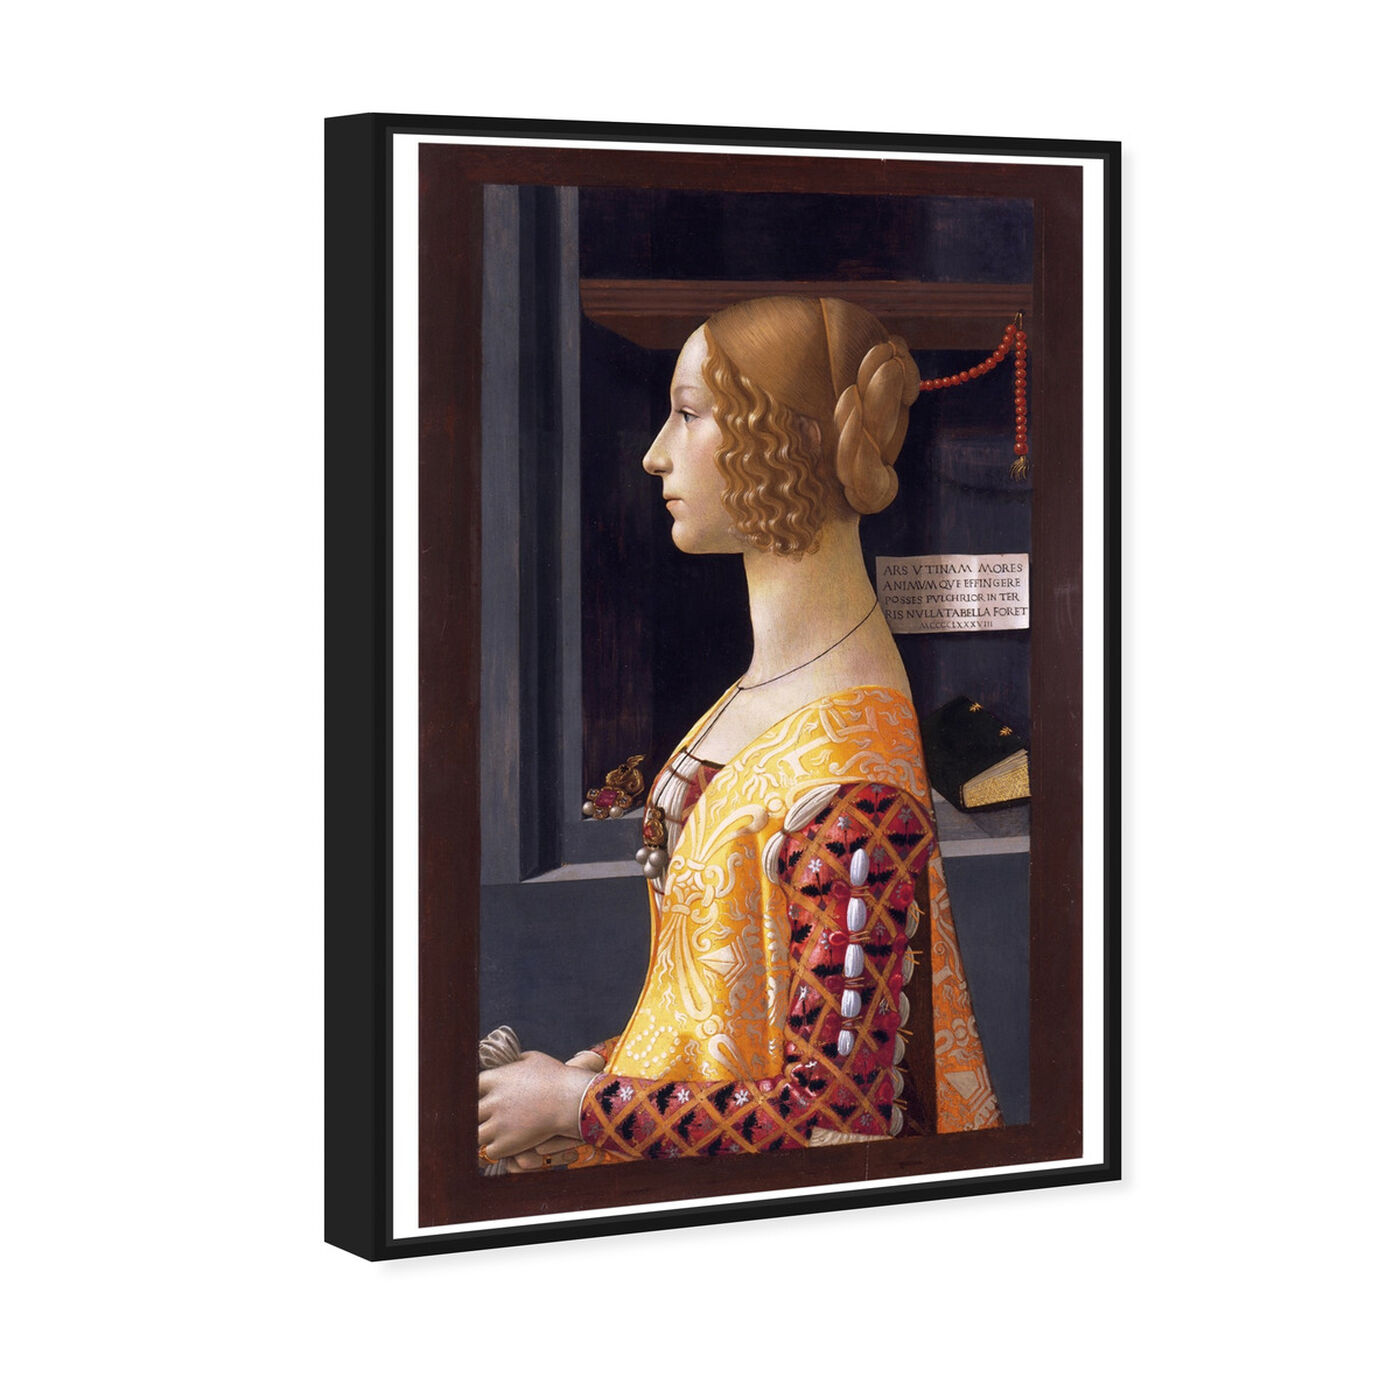 Angled view of Ghirlandaio - Giovanna Tornabuoni featuring classic and figurative and renaissance art.